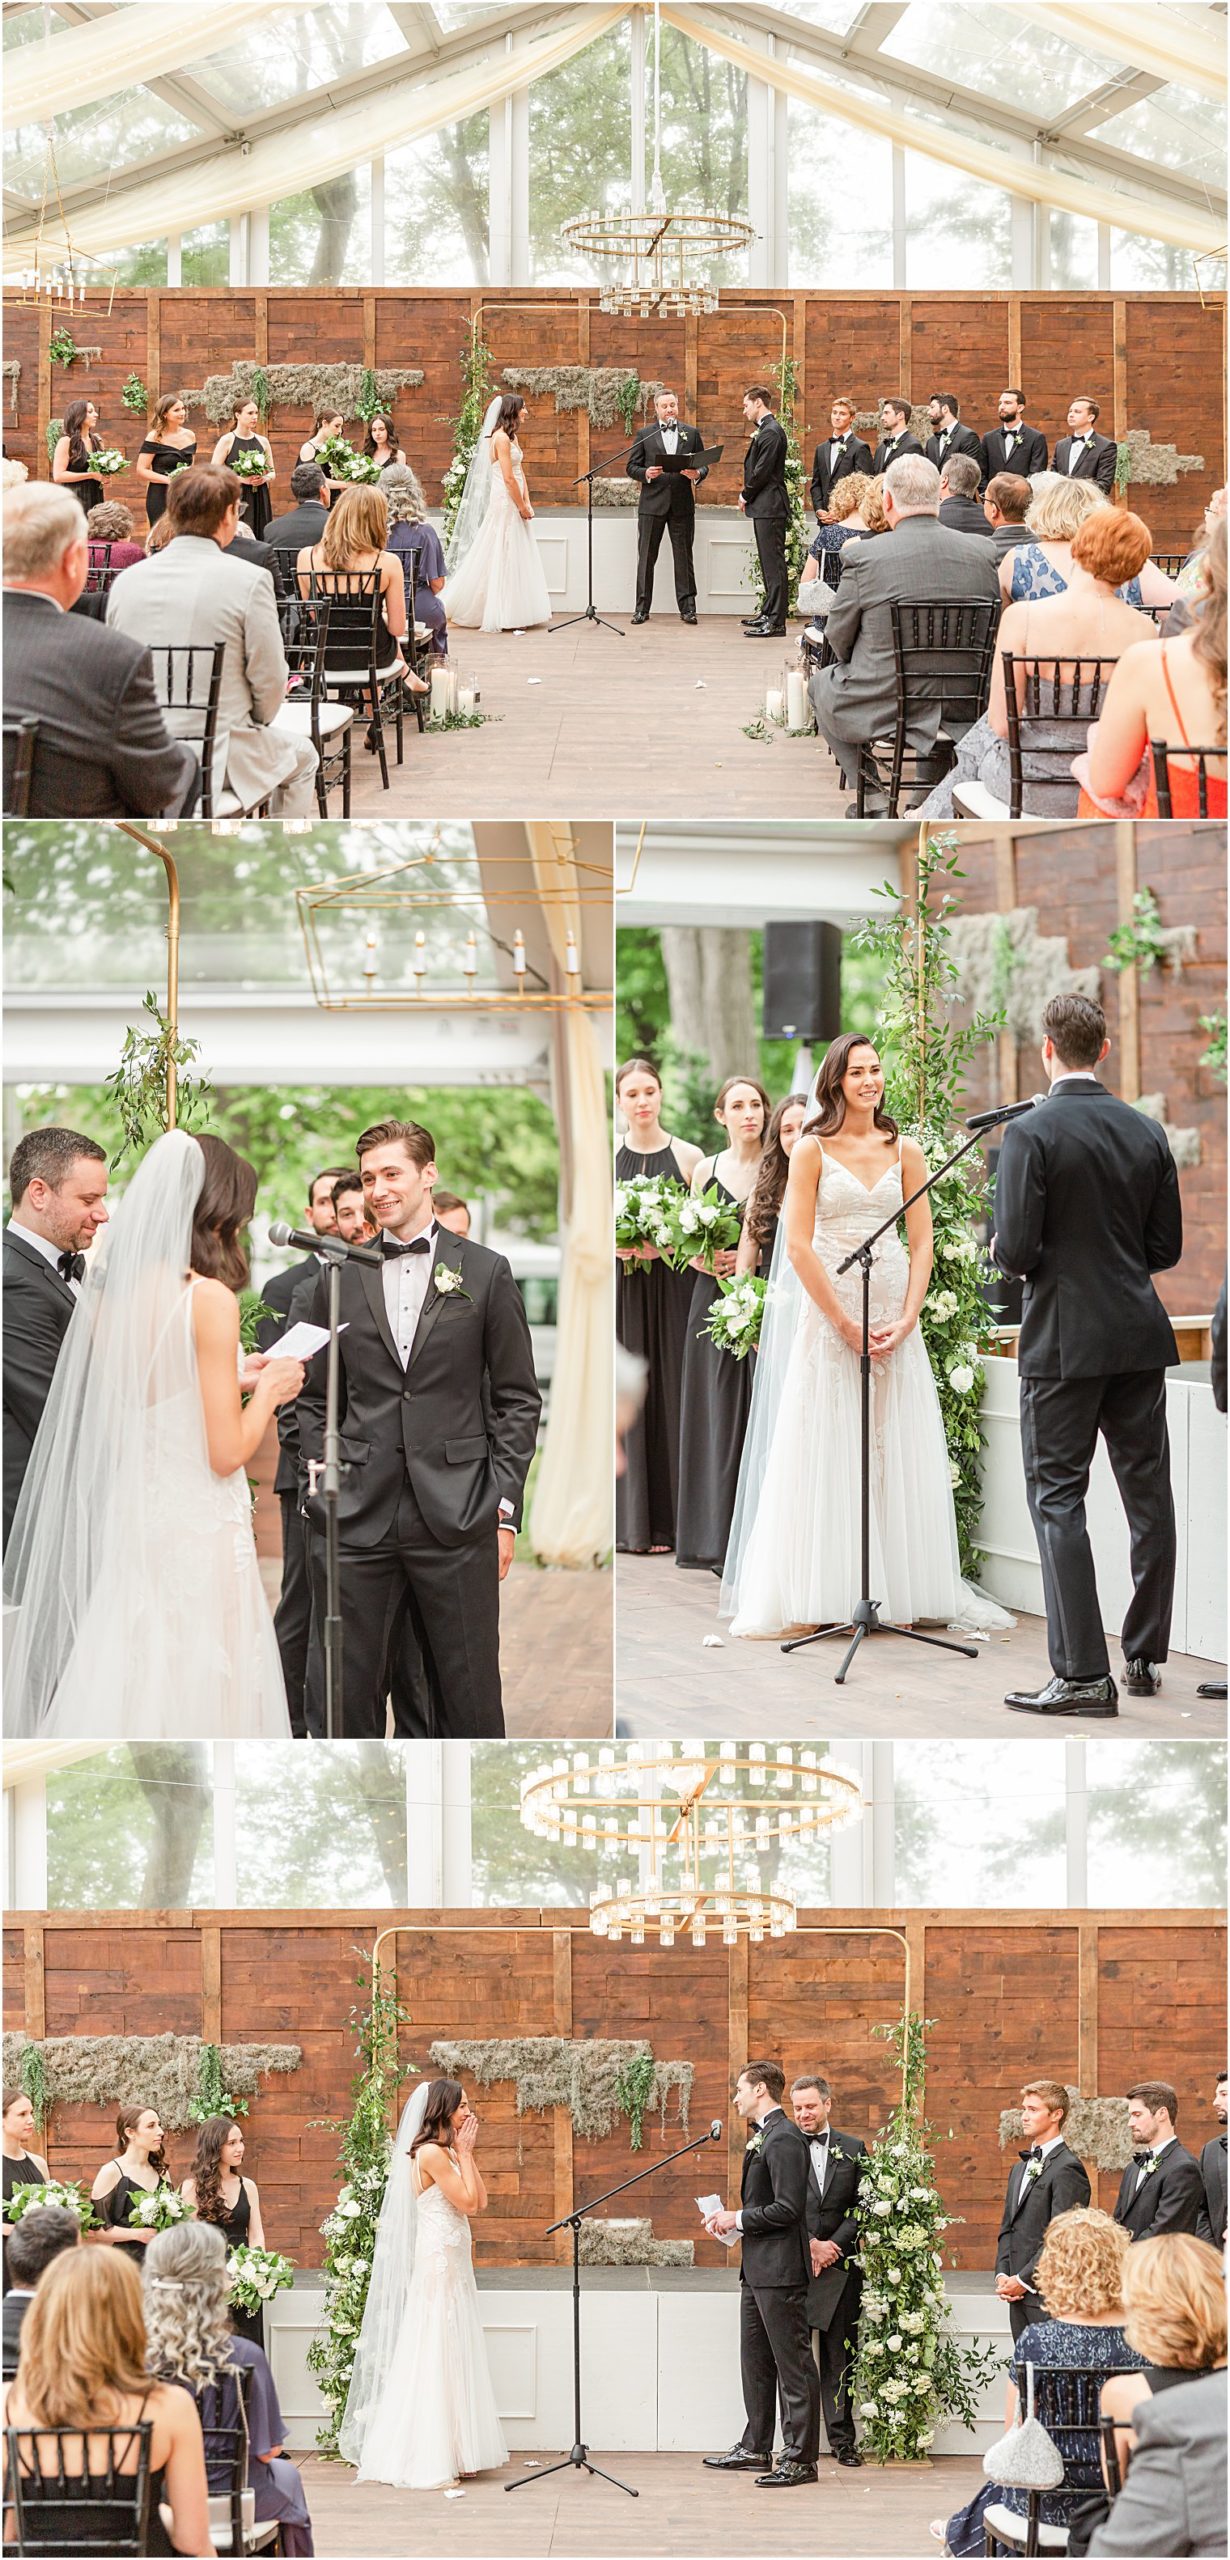 pictures of bride and groom exchanging wedding vows during wedding ceremony